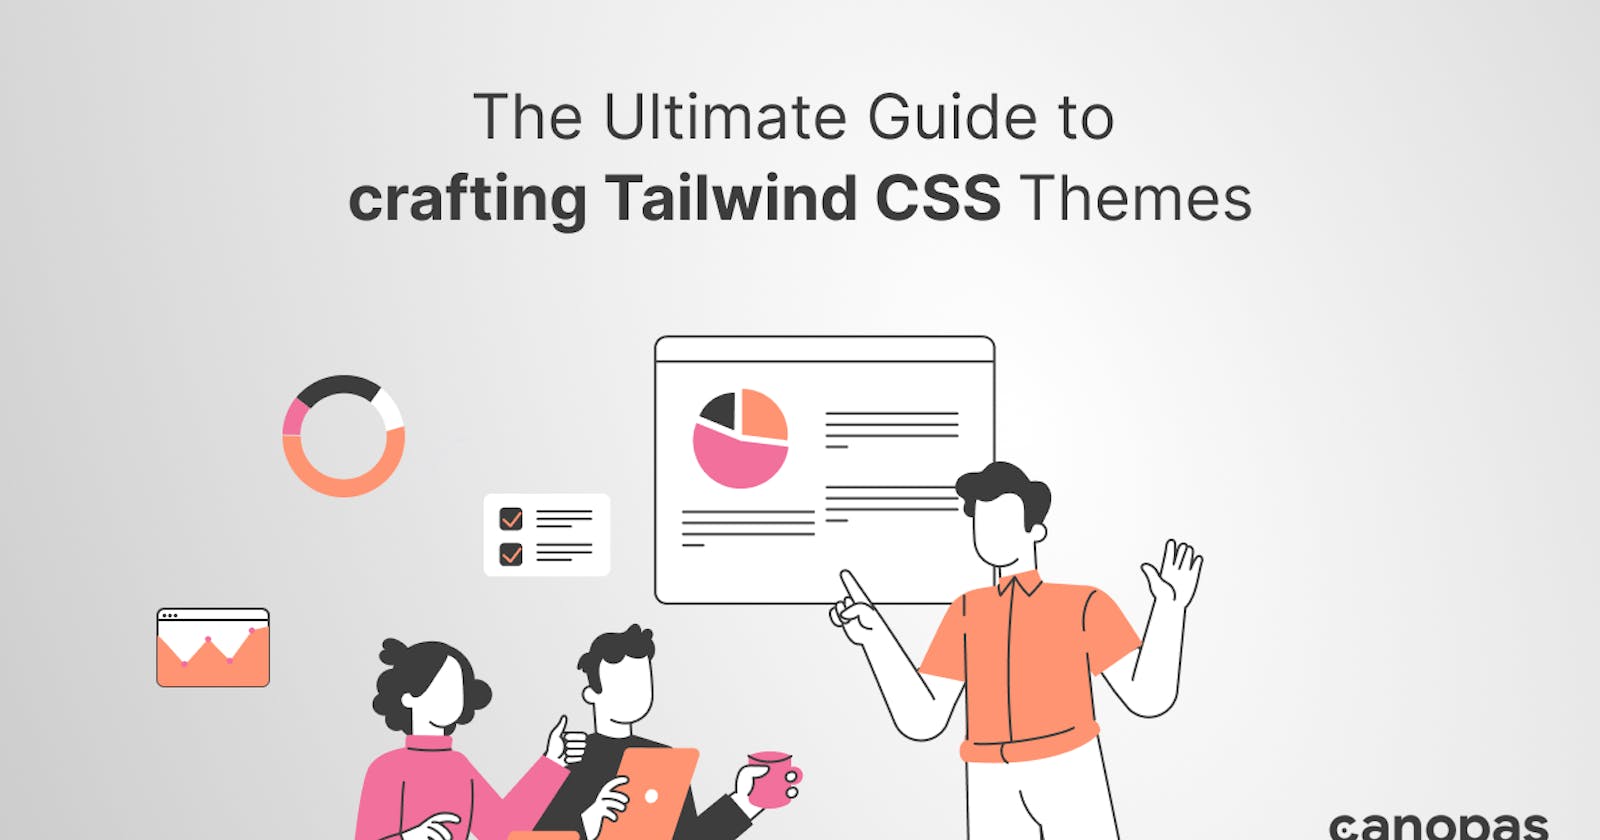 The Ultimate Guide to Crafting Tailwind CSS Themes